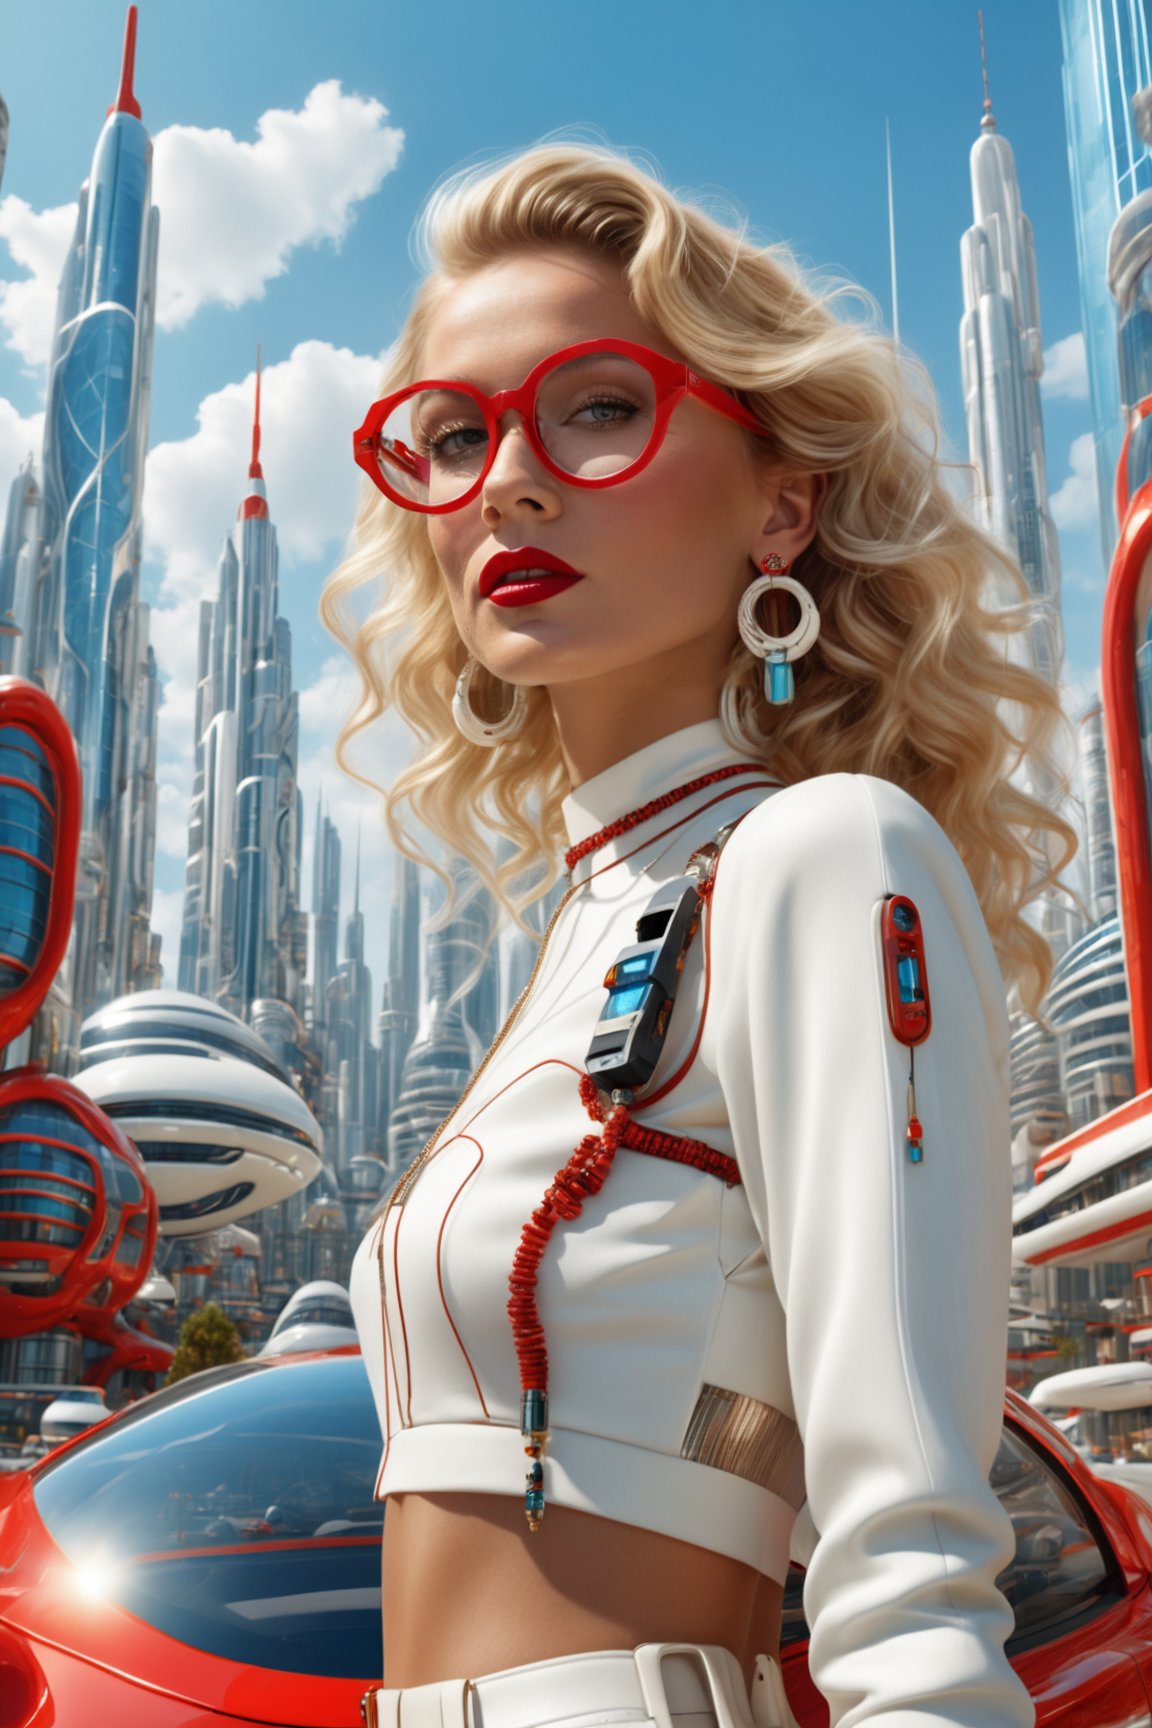 A young woman with wavy blonde hair, wearing round glasses, a white and red outfit, and various accessories like earrings and a choker. She stands in front of a futuristic cityscape with tall buildings, intricate designs, and a clear blue sky. A white car is parked behind her, and the overall ambiance suggests a vibrant and technologically advanced urban setting.